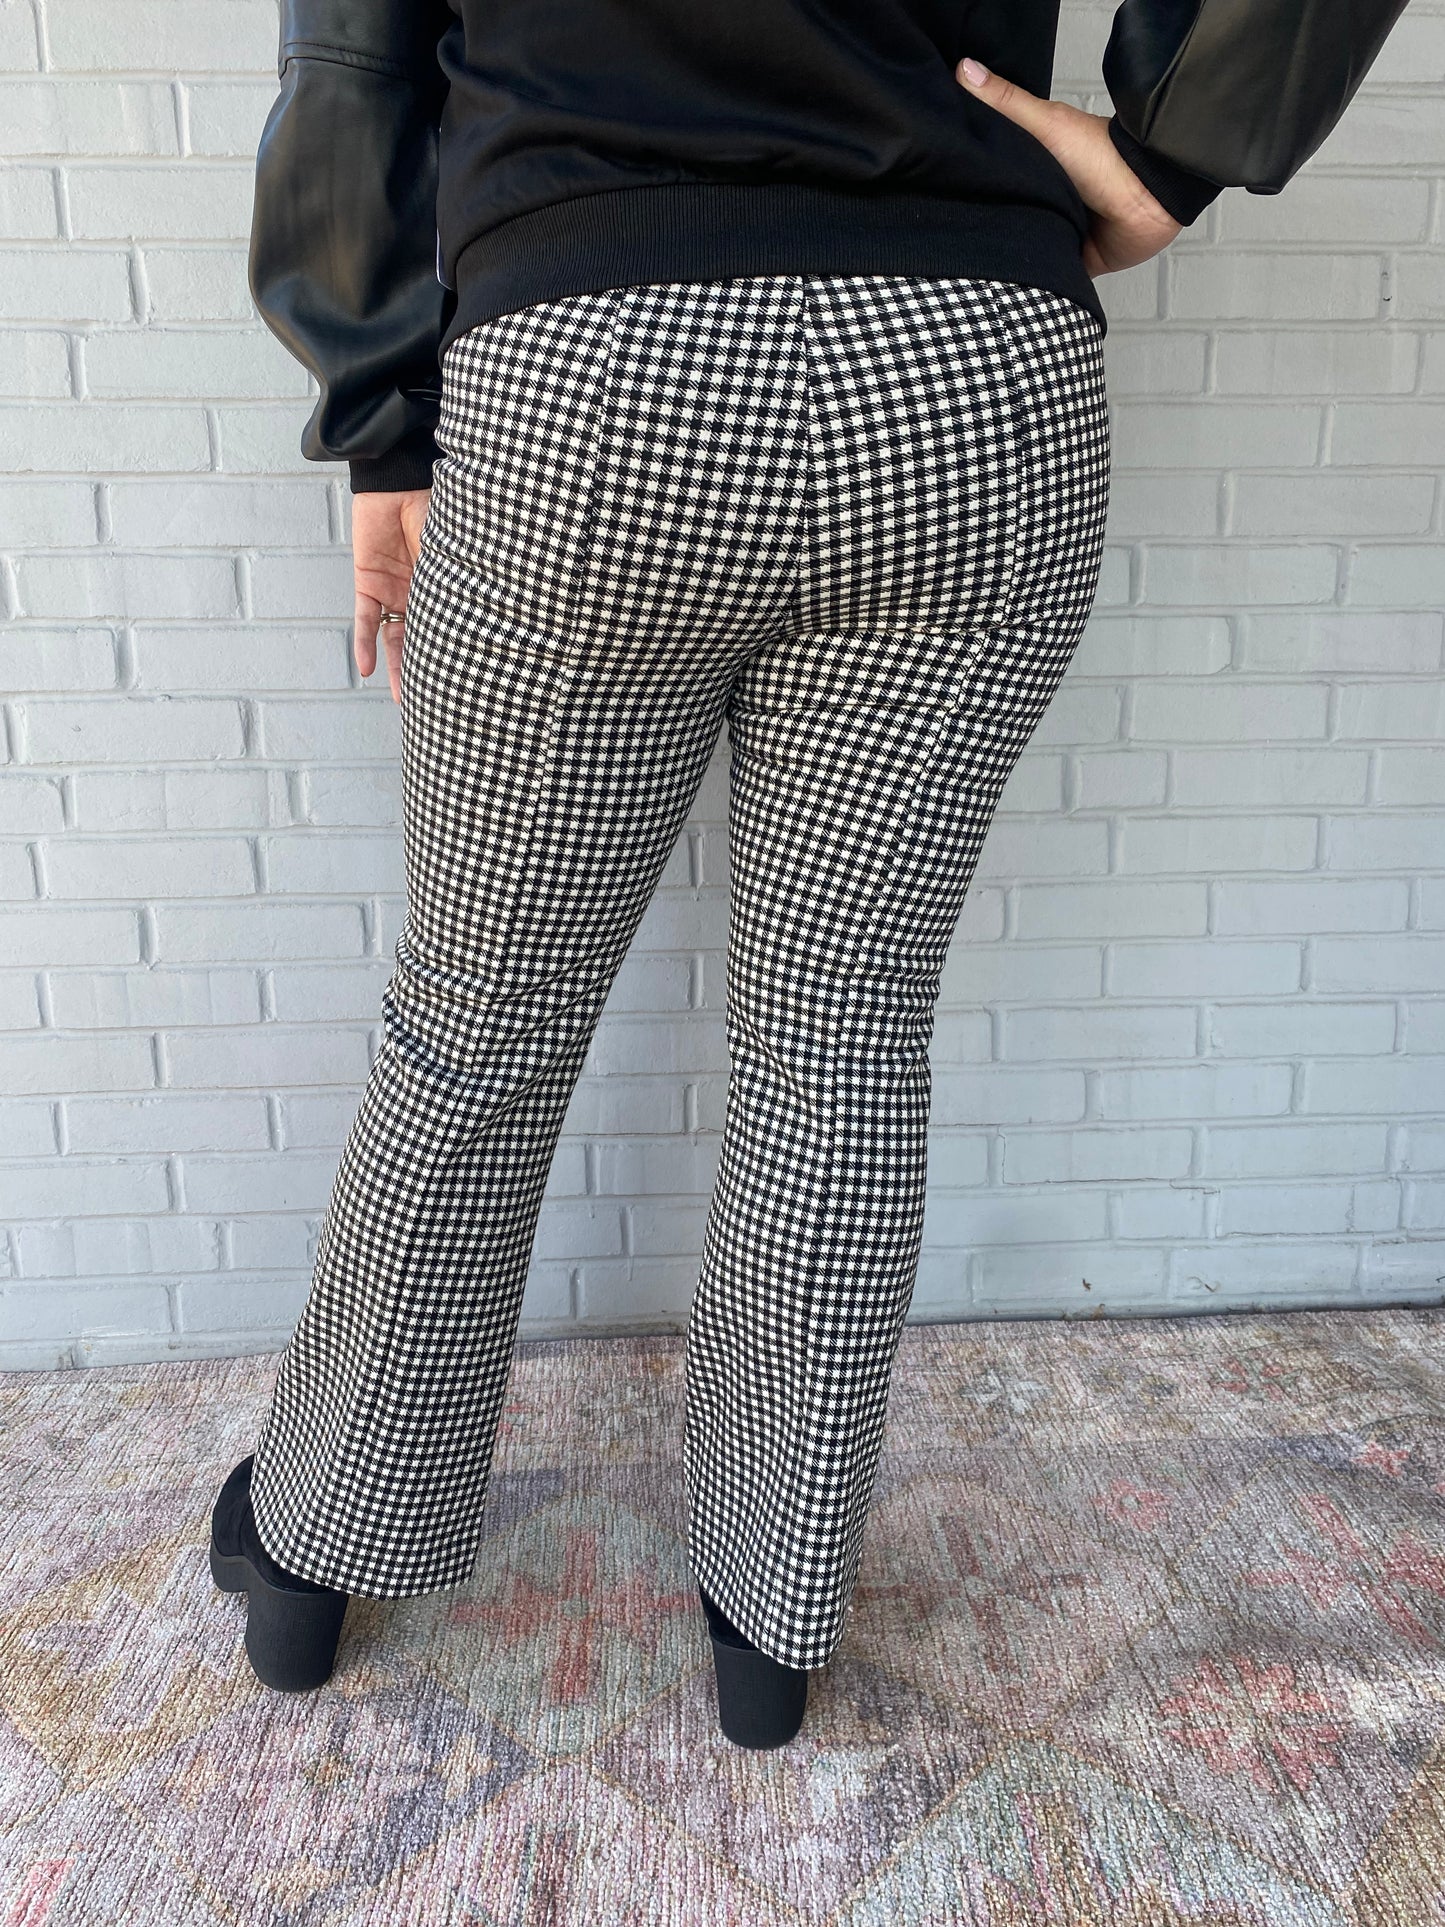 Check Mate Knit Pant in Black